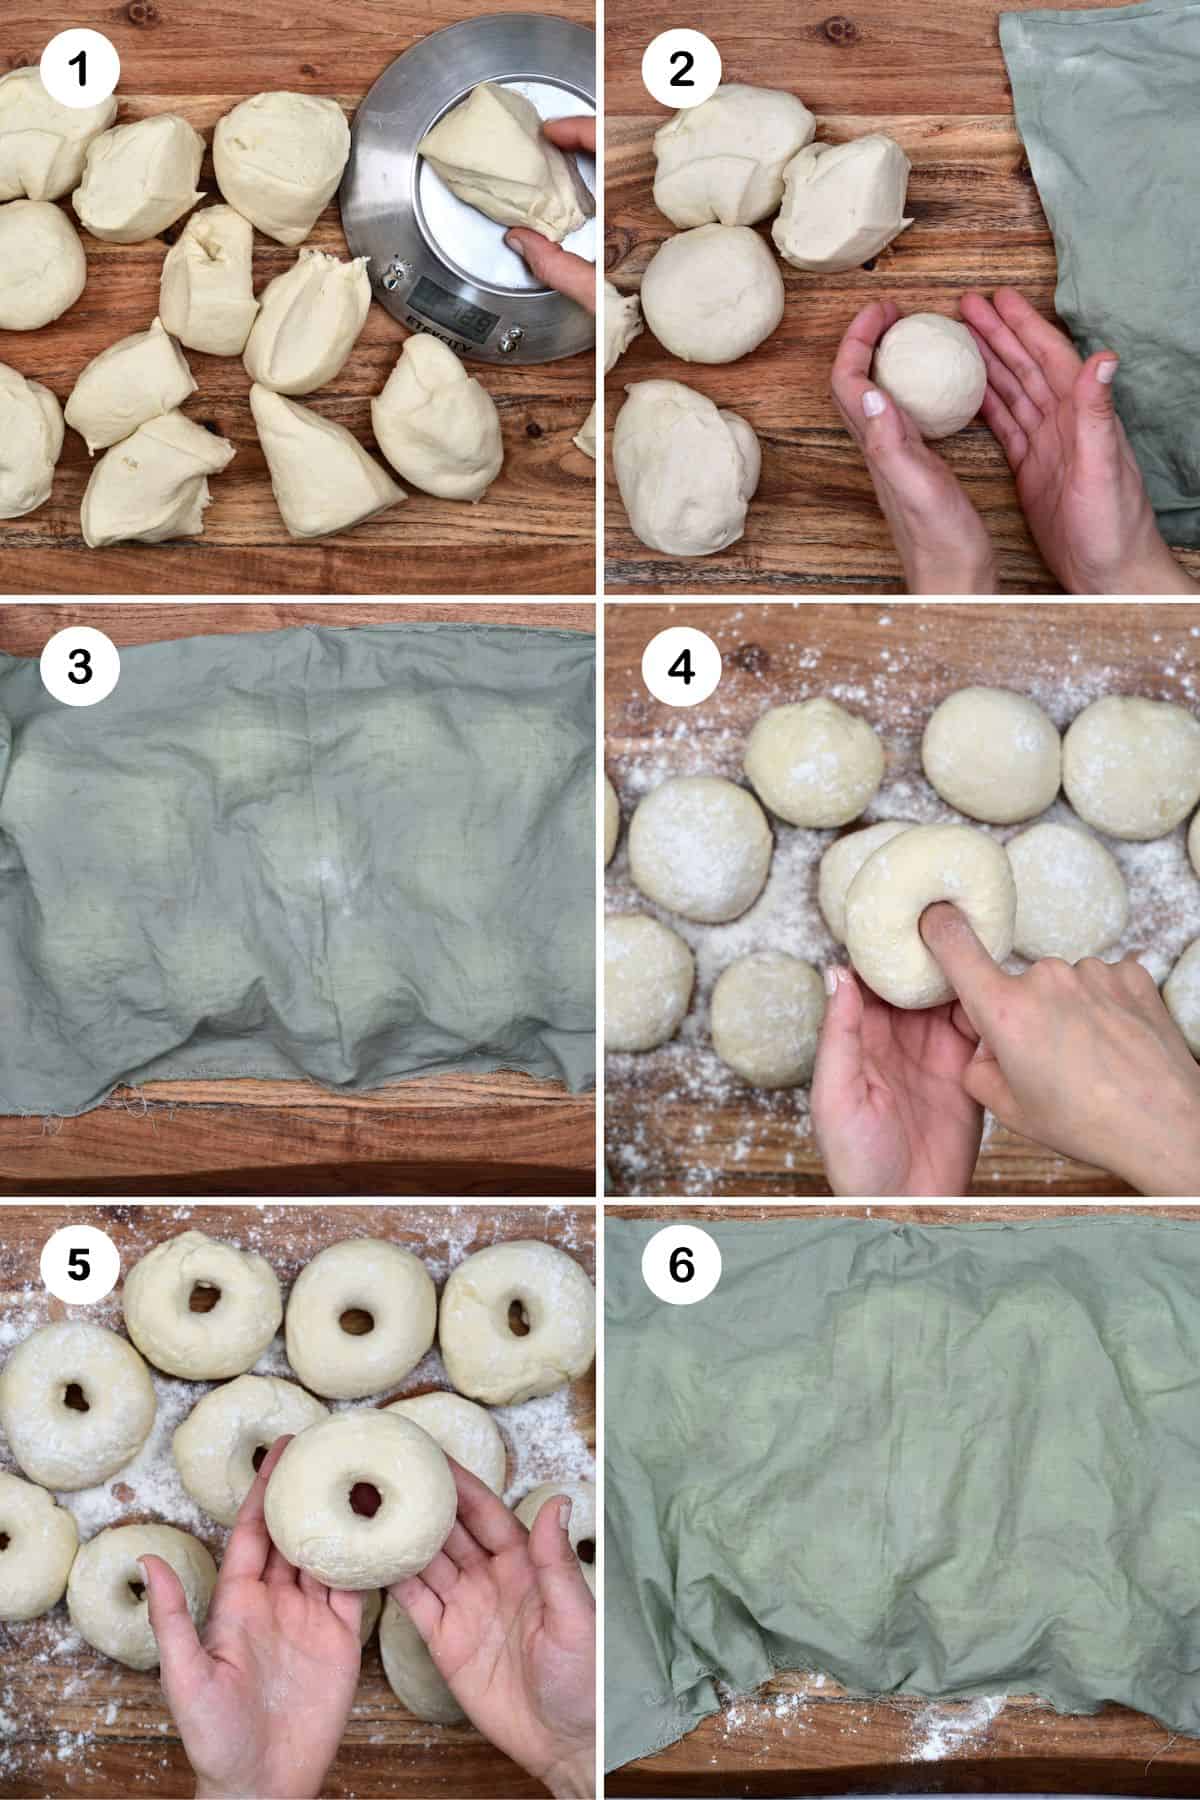 Steps for shaping bagels